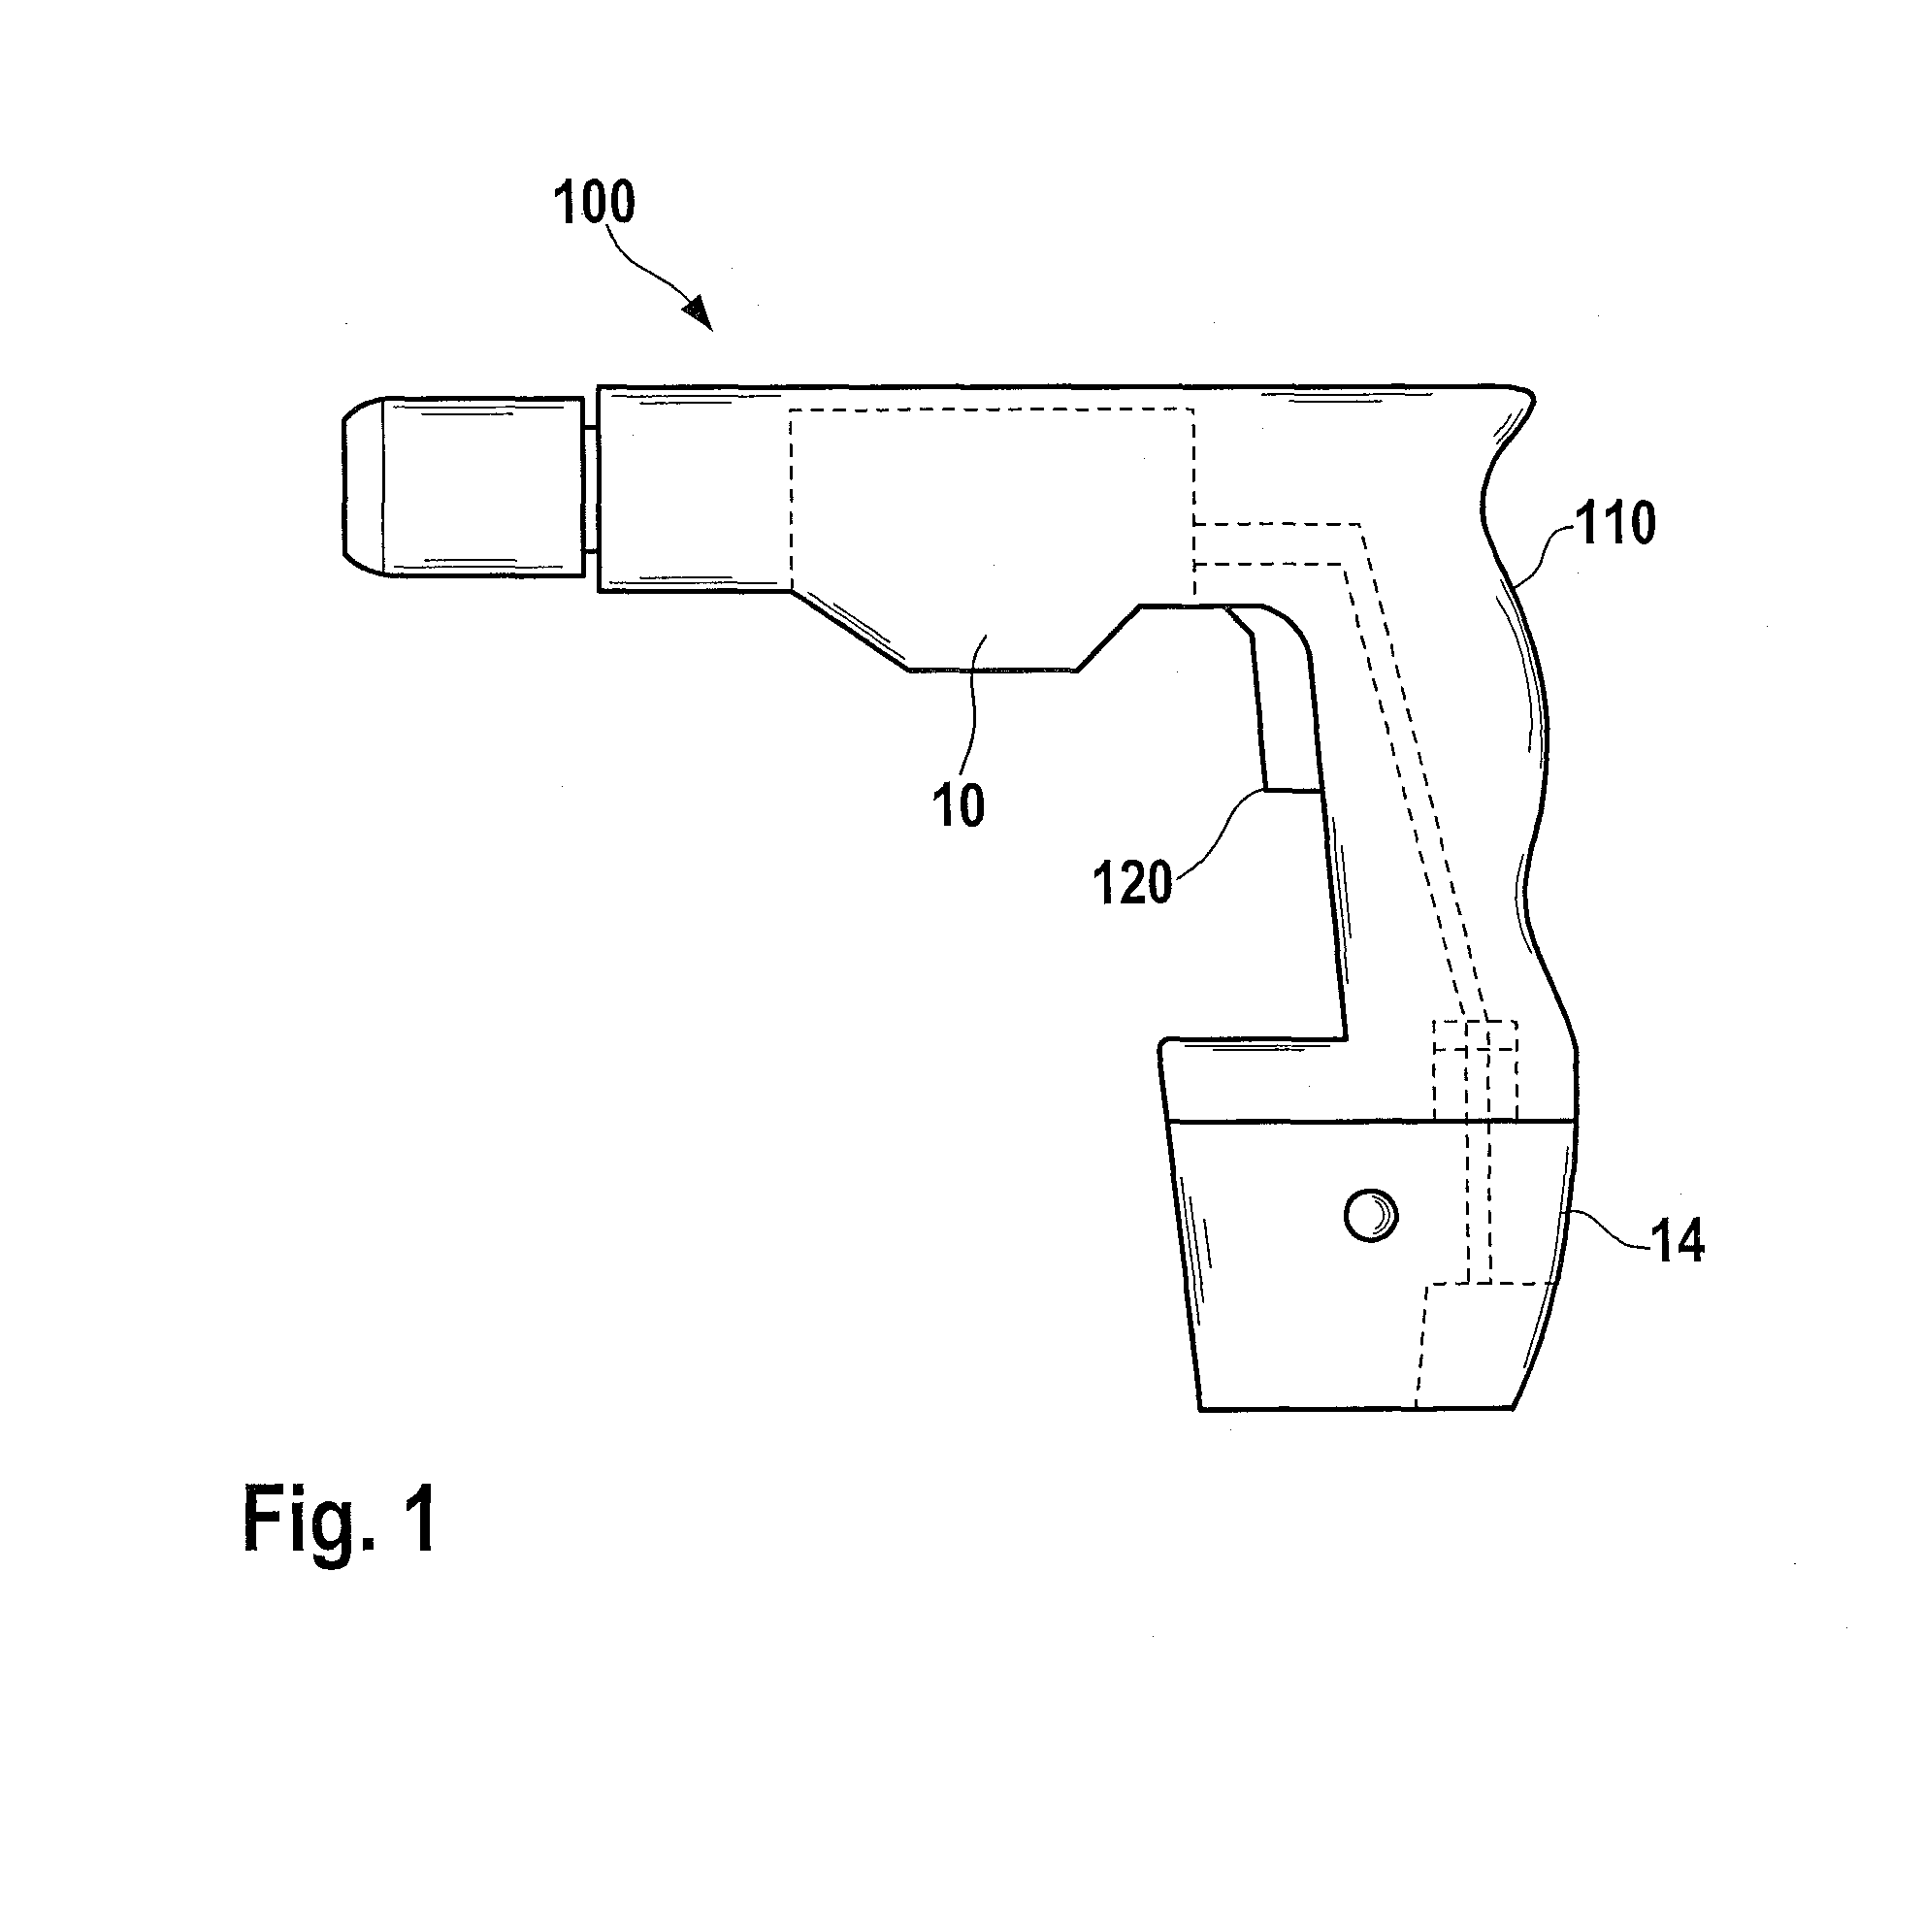 Electric power tool and method for operating same